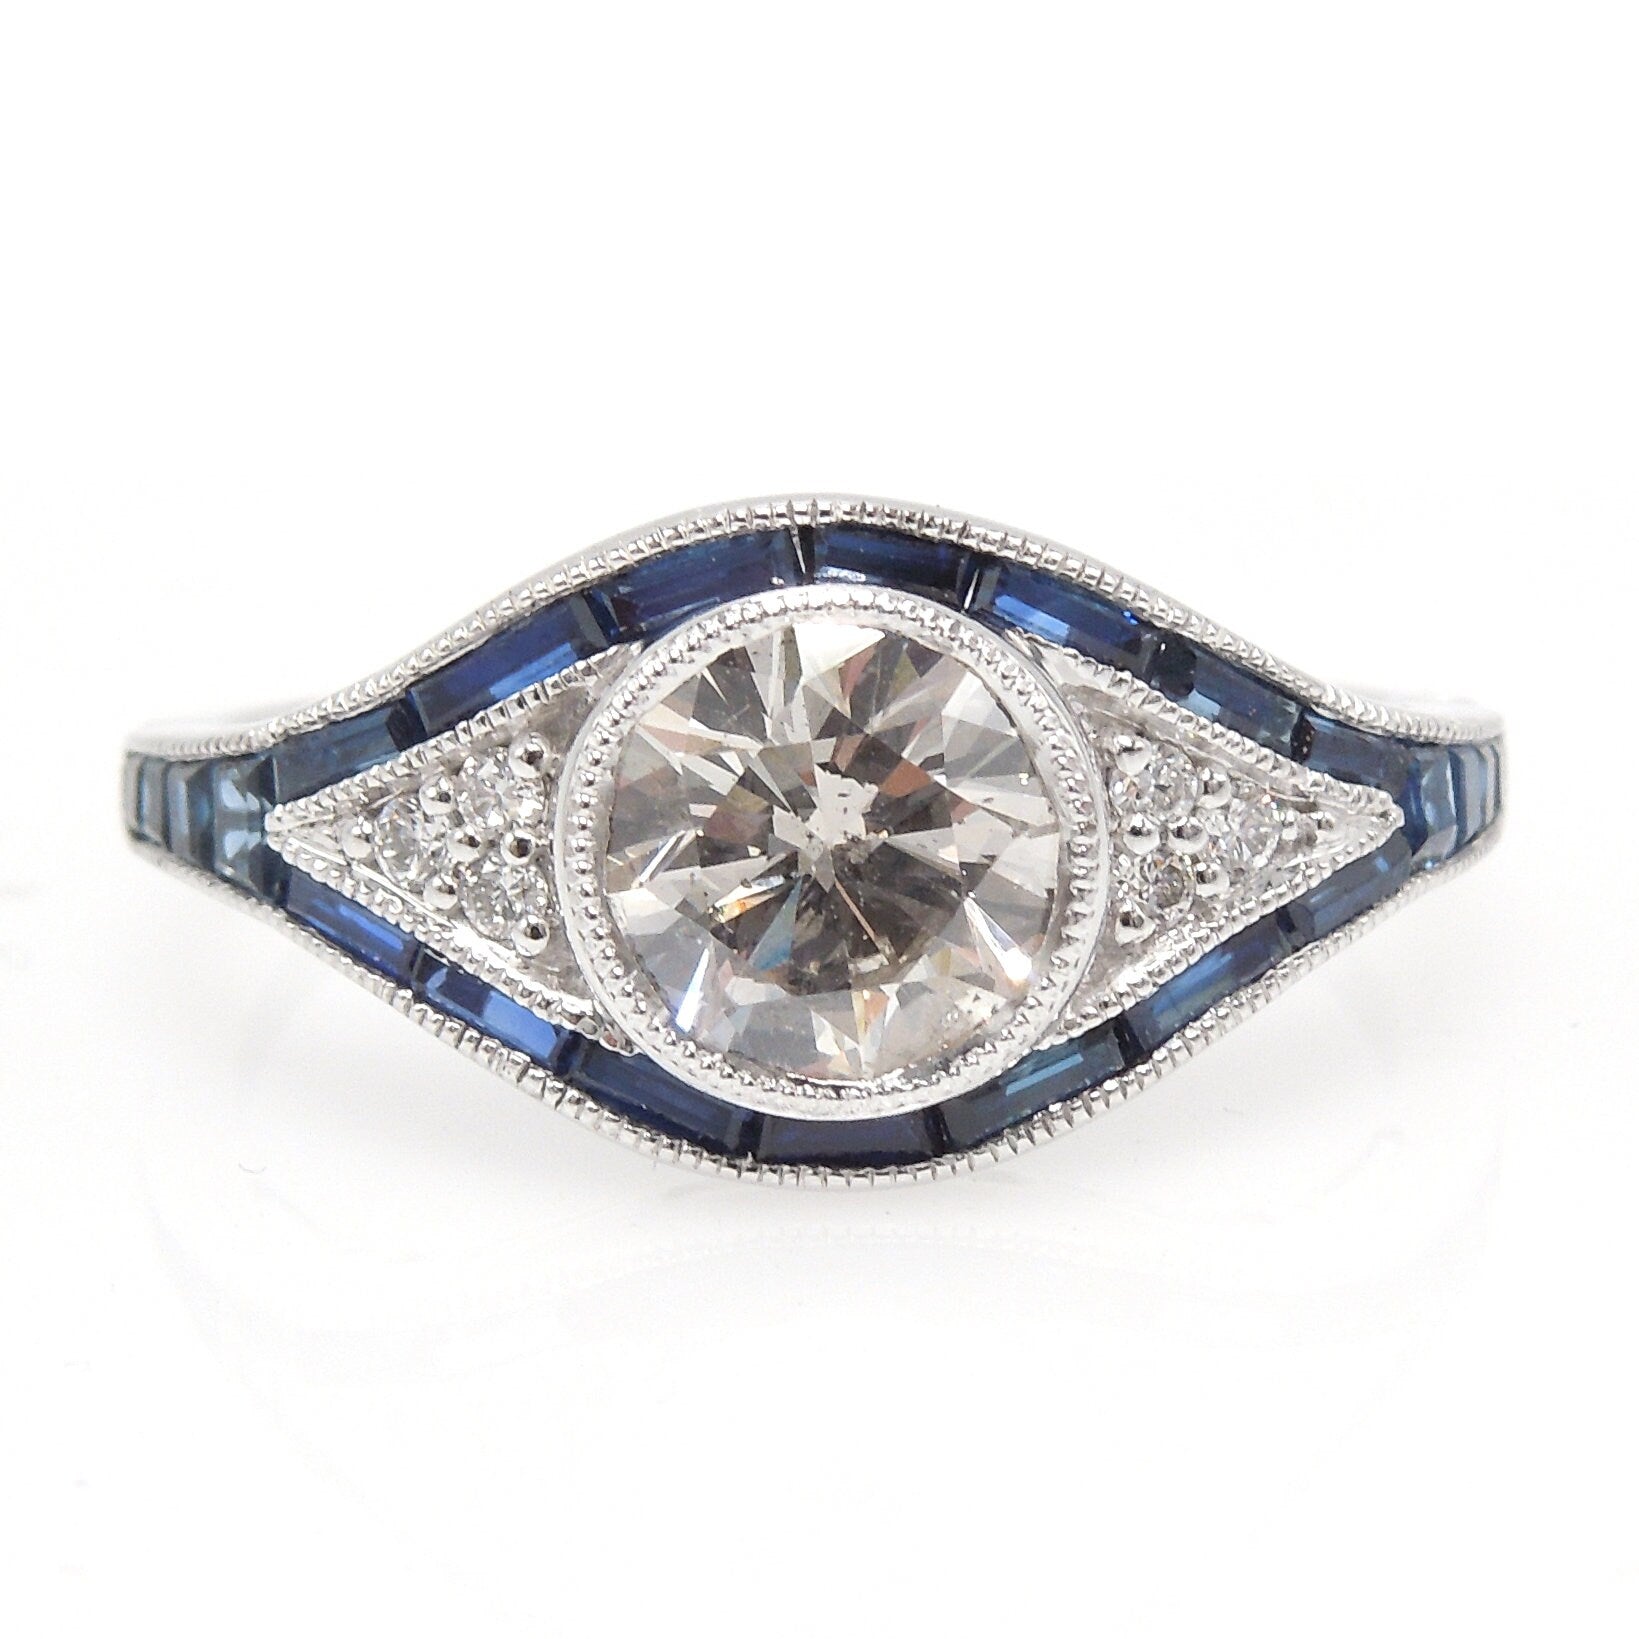 Eye Shaped Art Deco Style Diamond Ring with French Calibre Cut Sapphires in White Gold